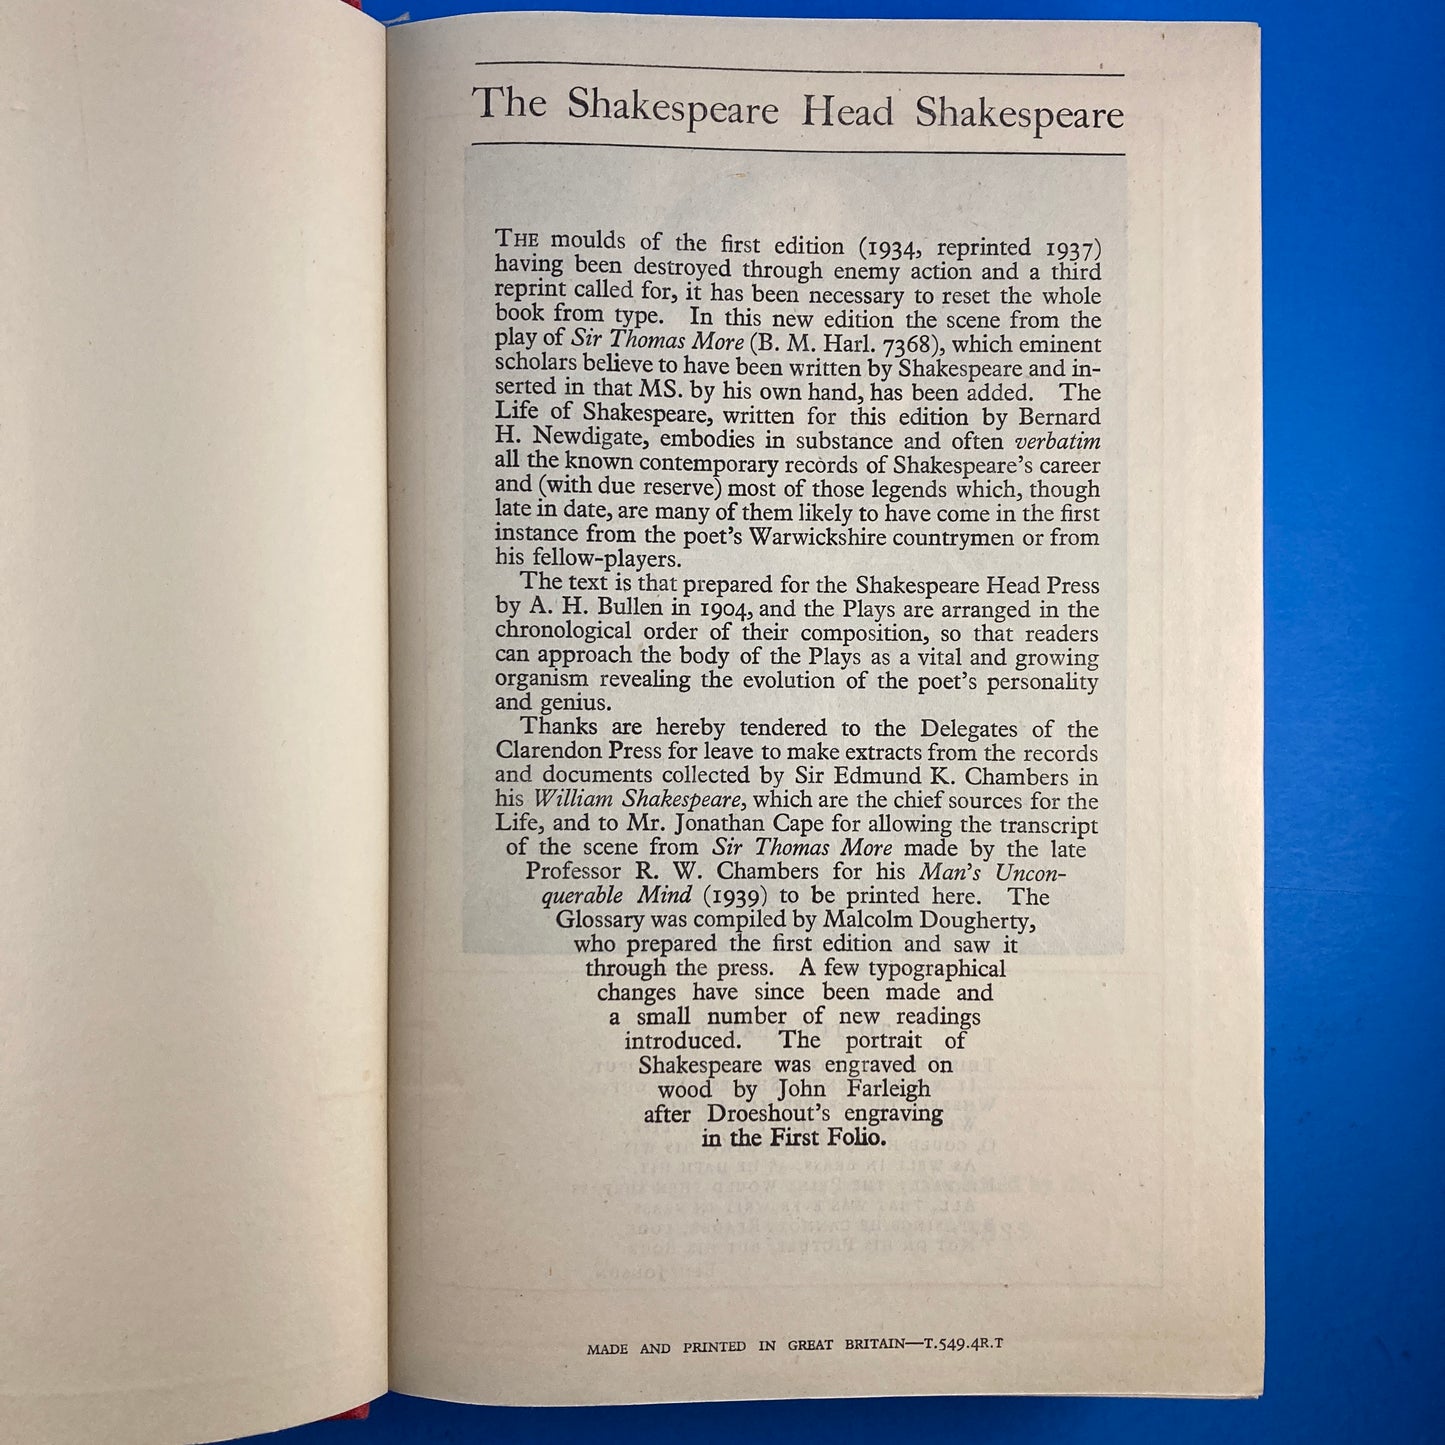 The Works of William Shakespeare Gathered into One Volume